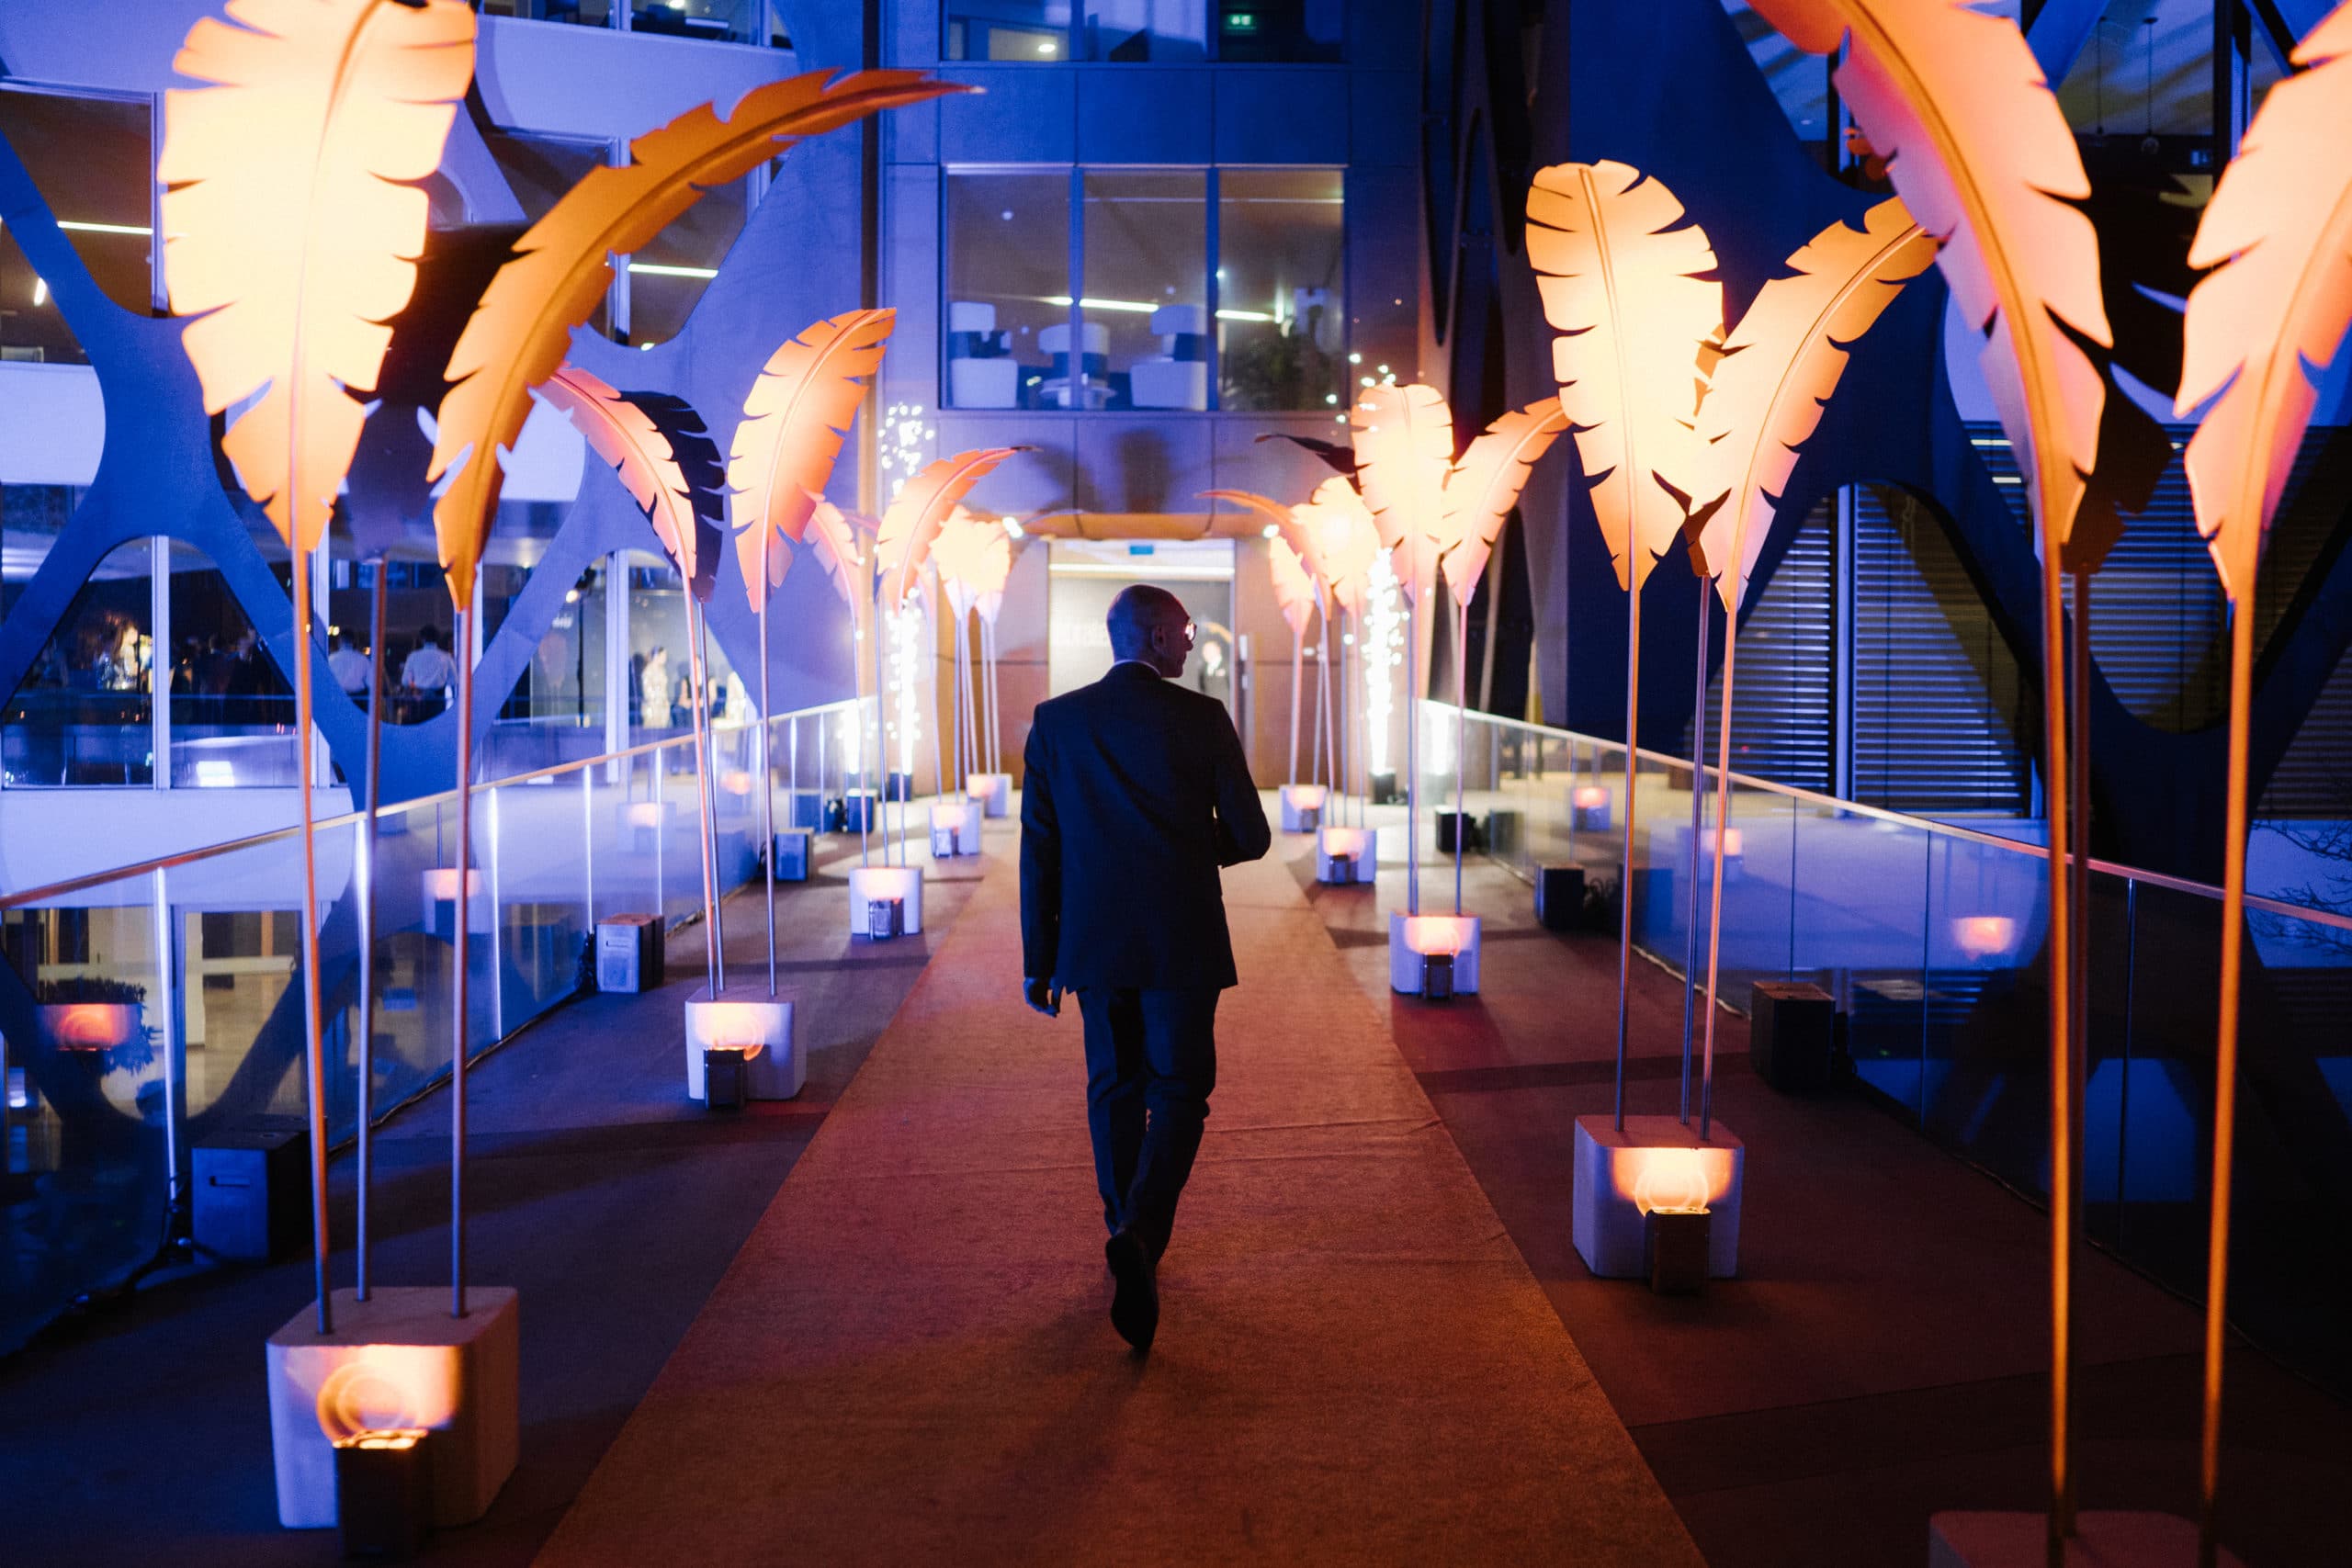 Shine a light event agency Luxembourg - Creates immersives experiences - KPMG Anniversary